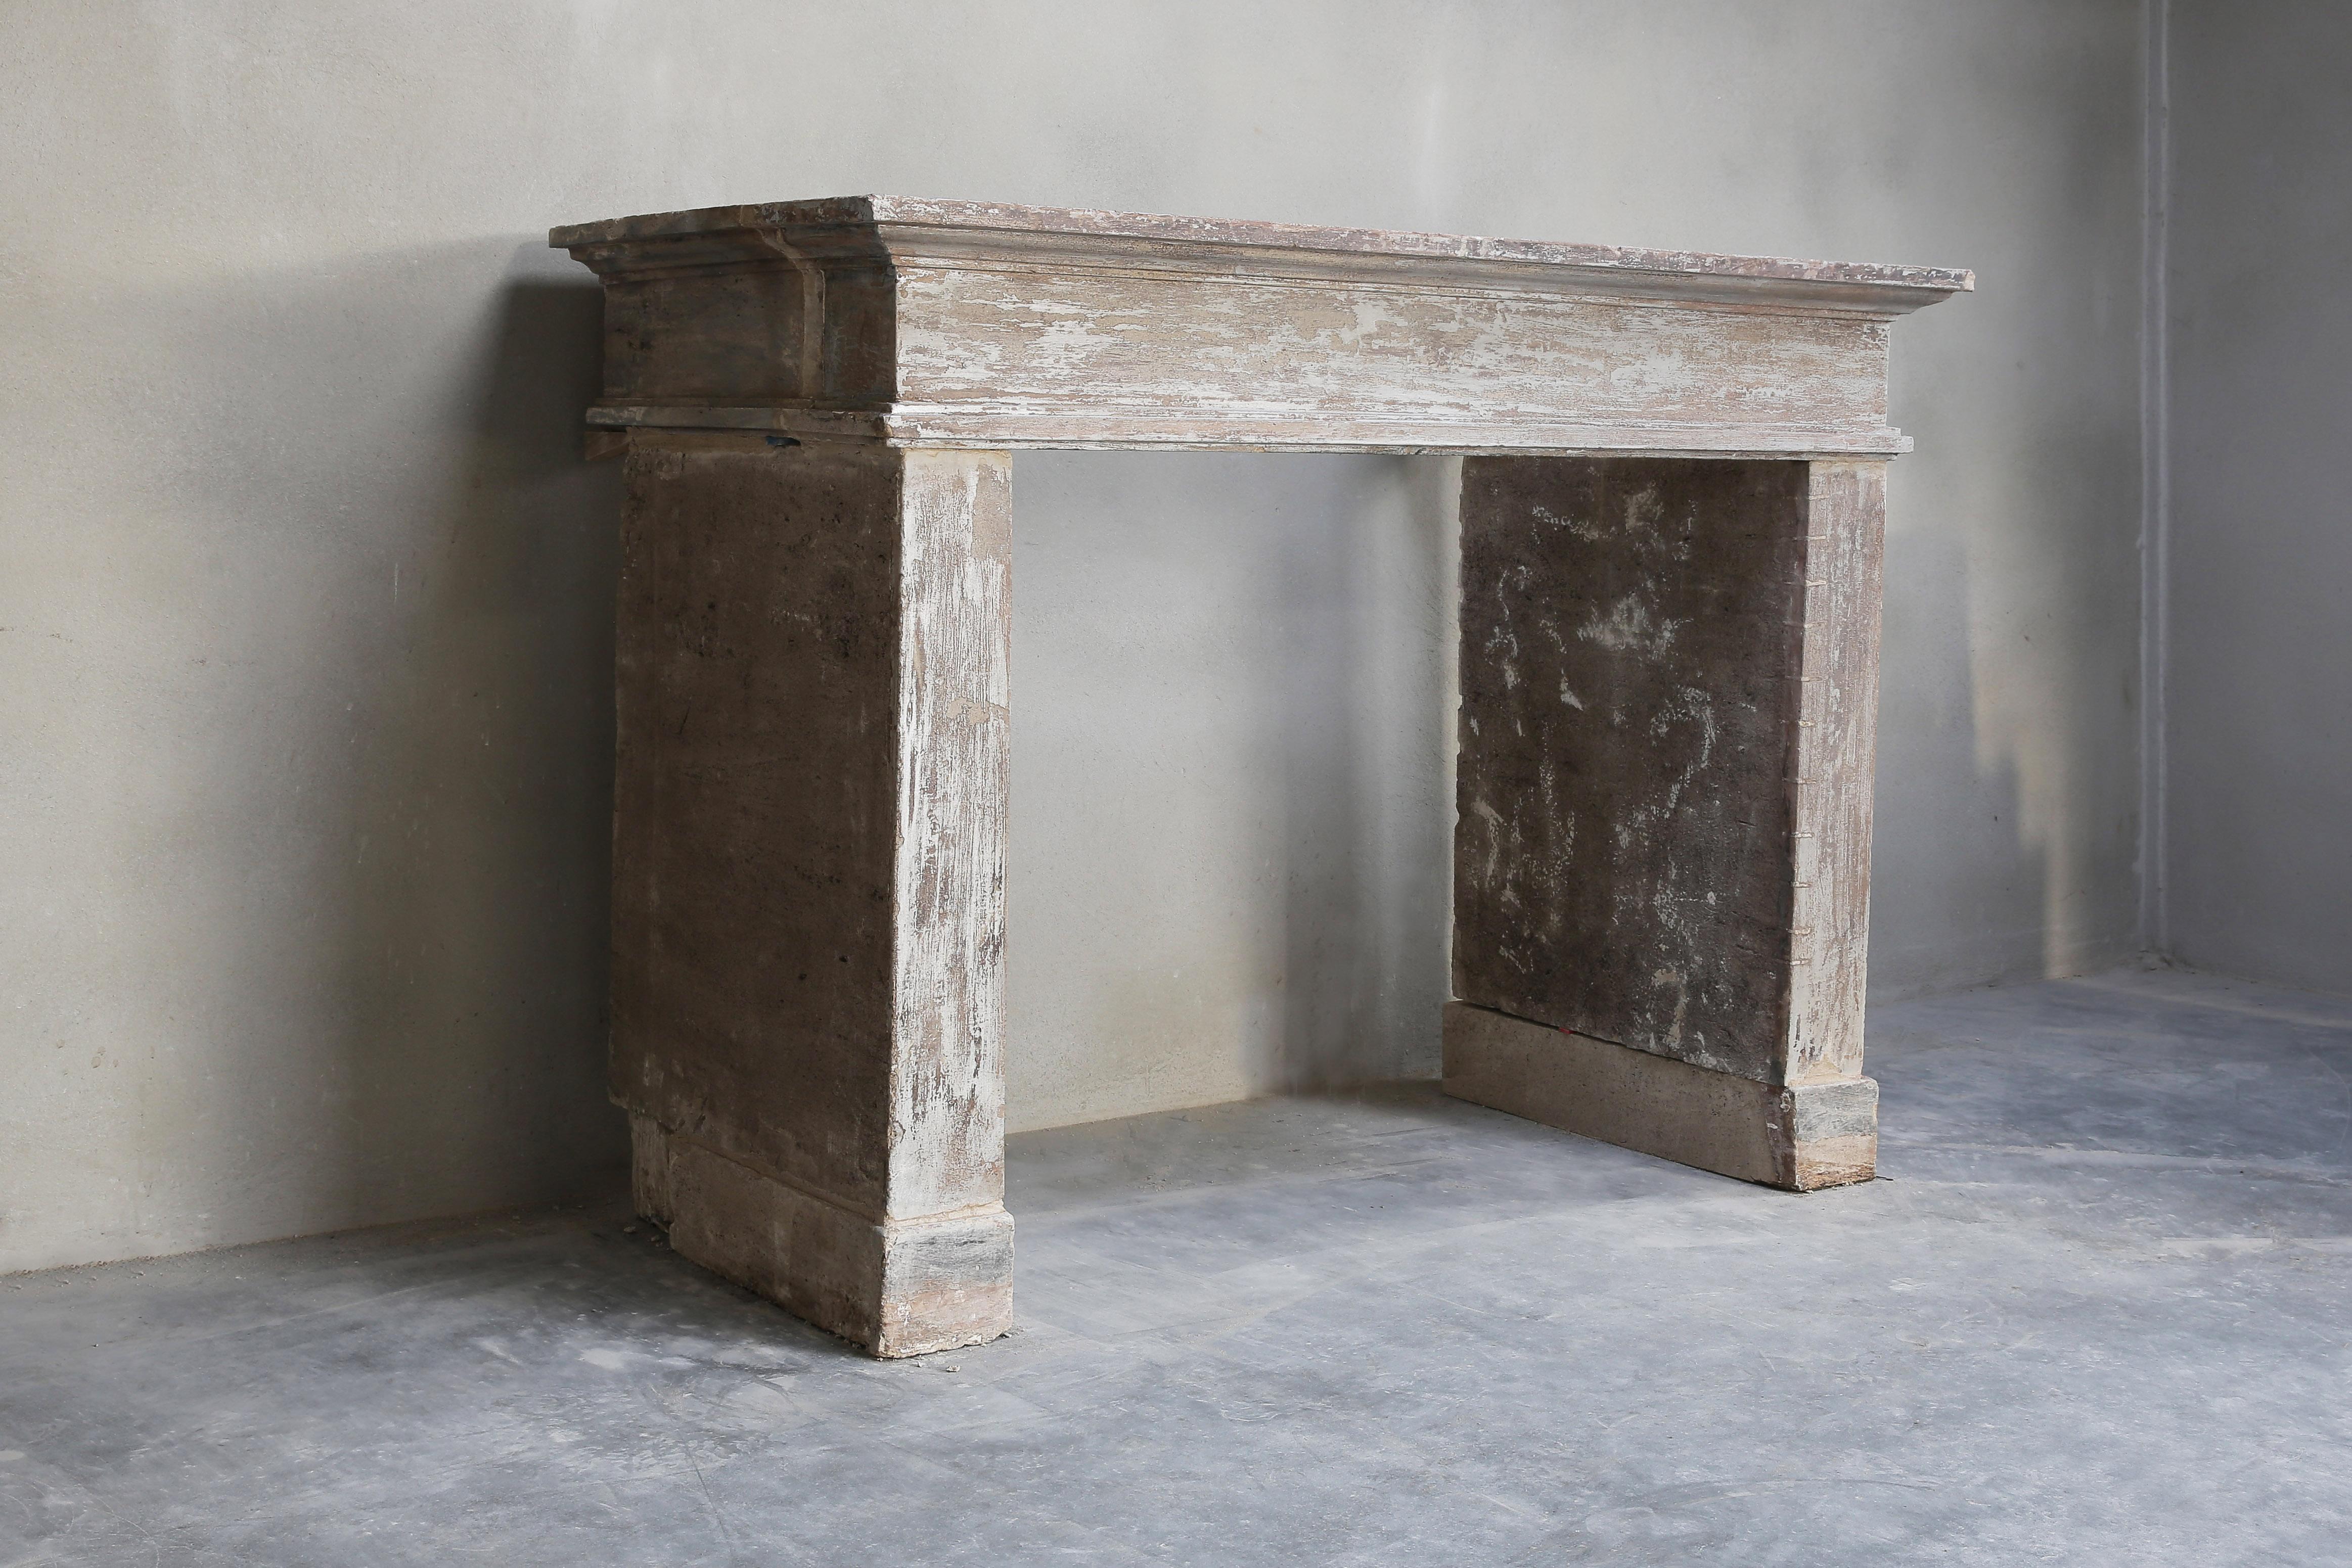 Sober and simple antique mantelpiece made of French limestone from the 19th century. Robust due to the front top and straight legs. The chimney is patinated and gets an authentic rural look. A very nice fireplace that fits perfectly within a rustic